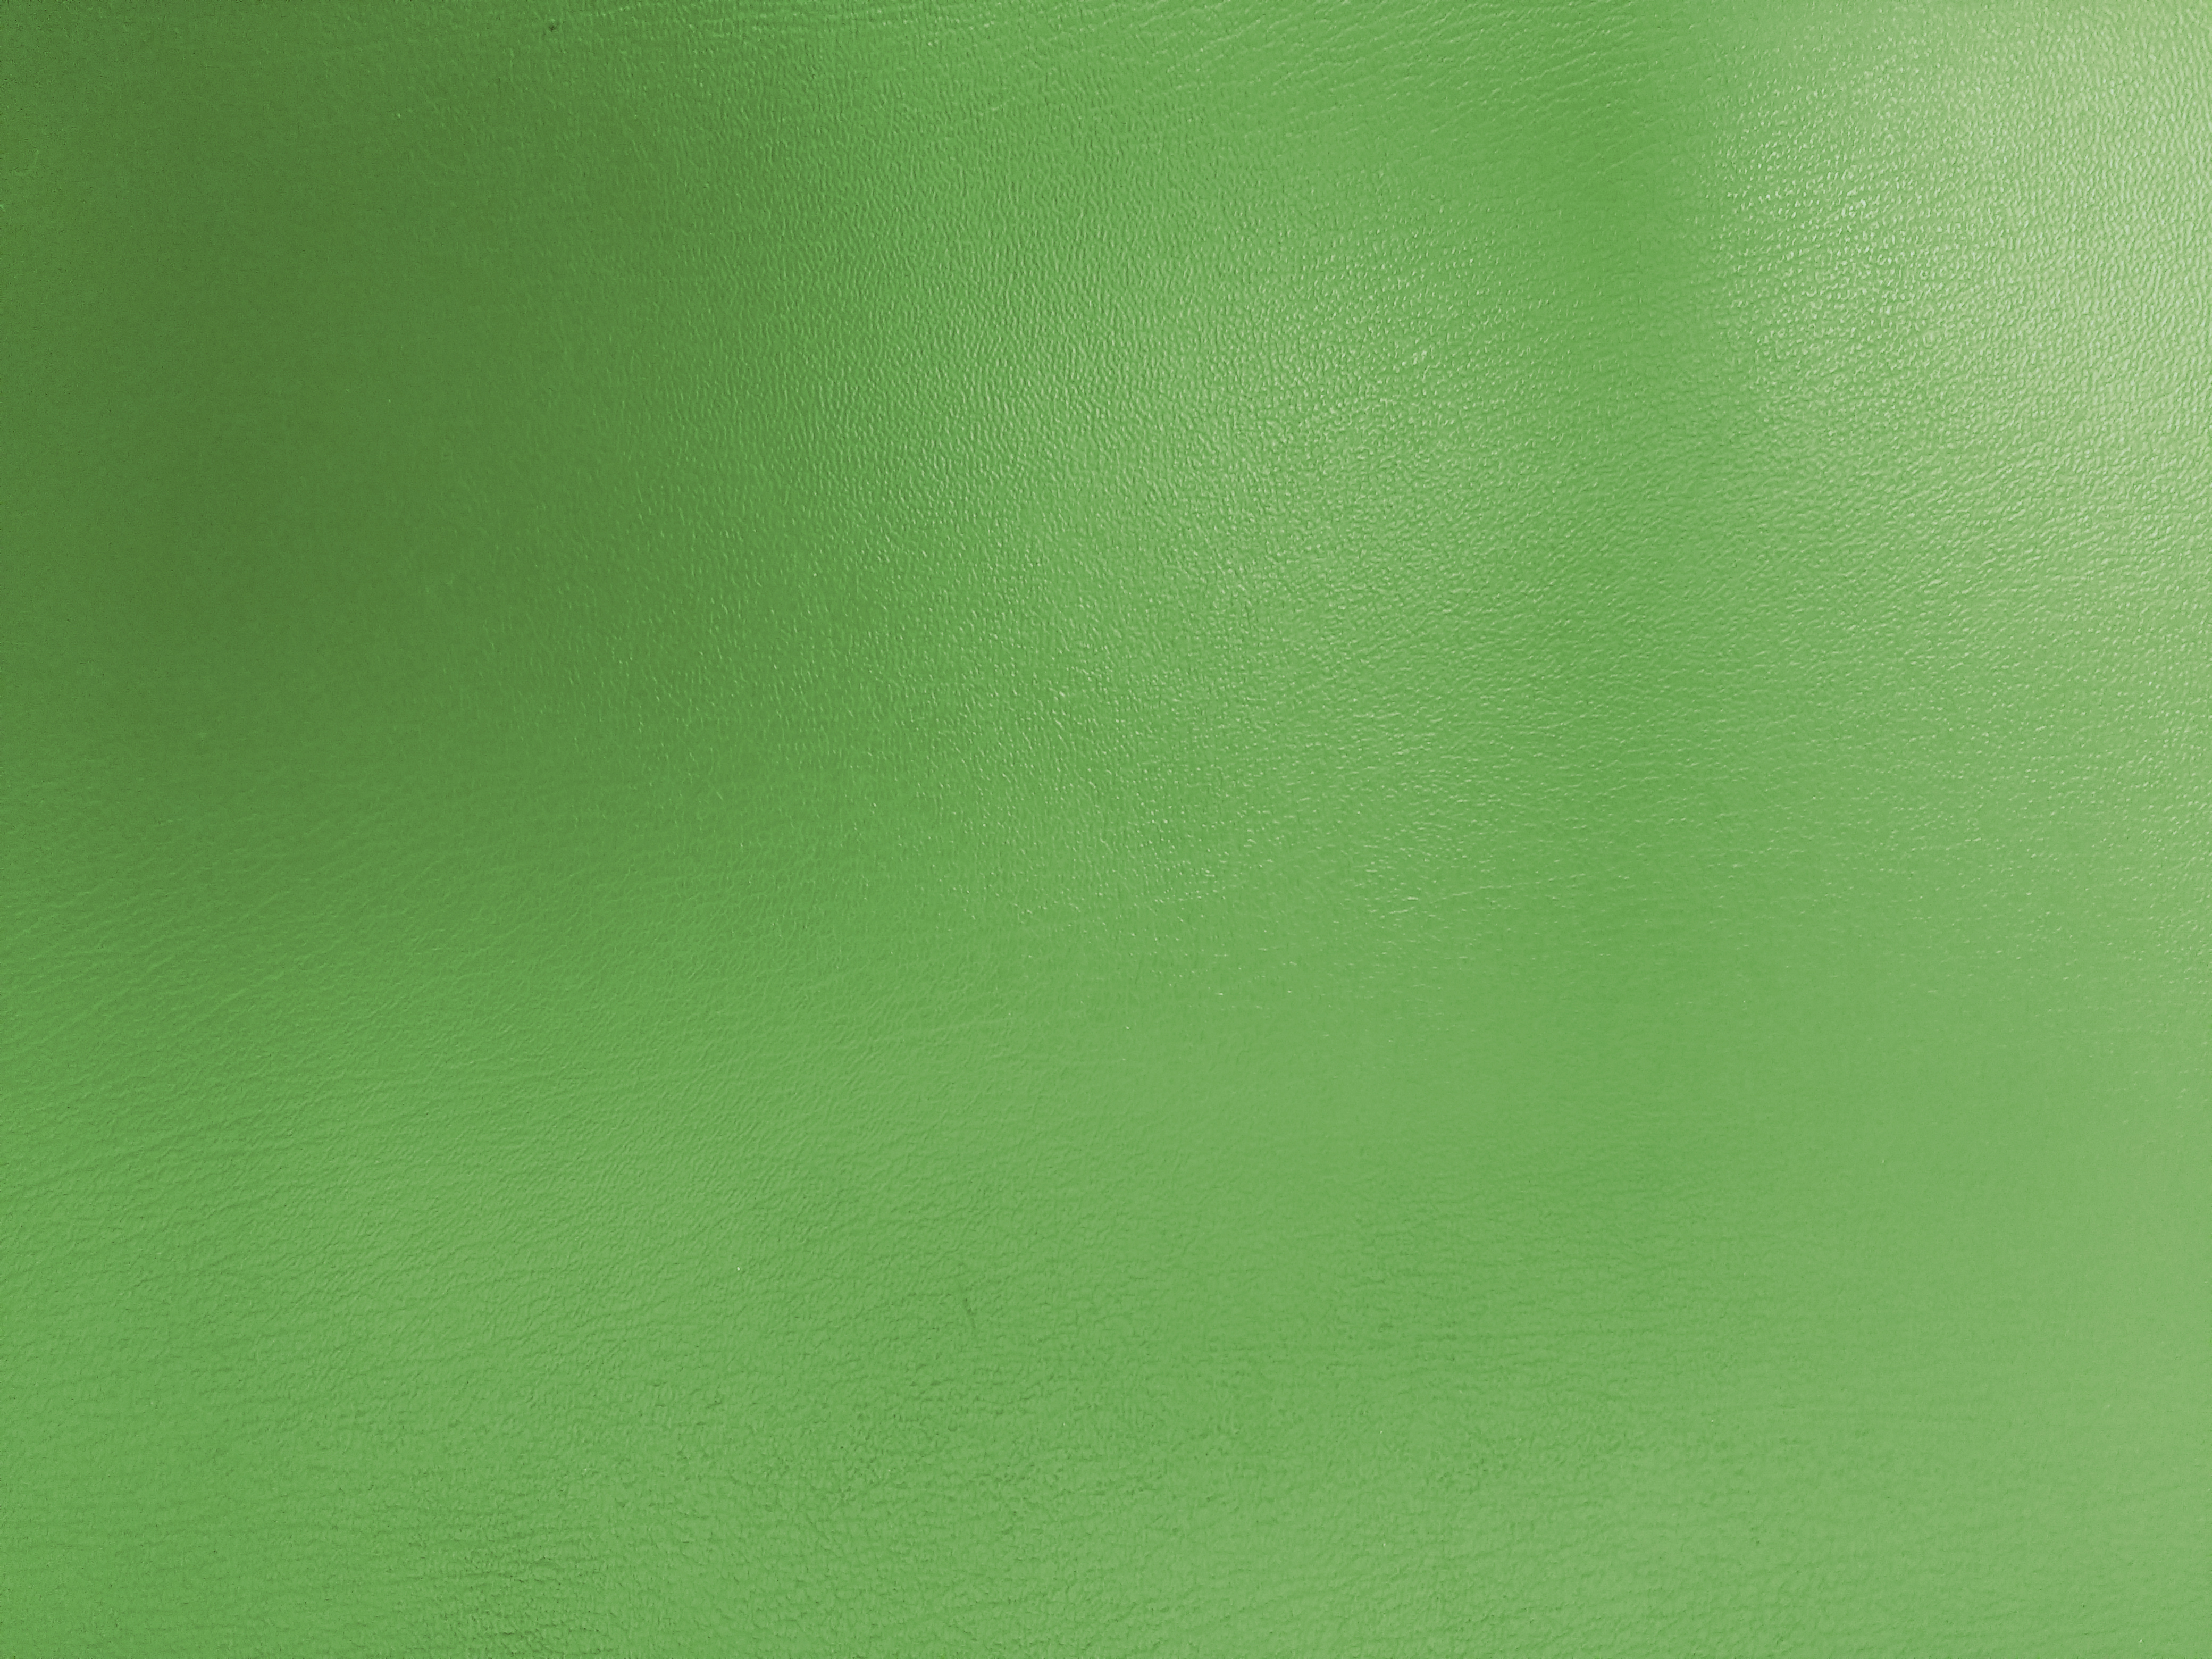 Green Leather Effect Background Free Stock Photo - Public Domain Pictures